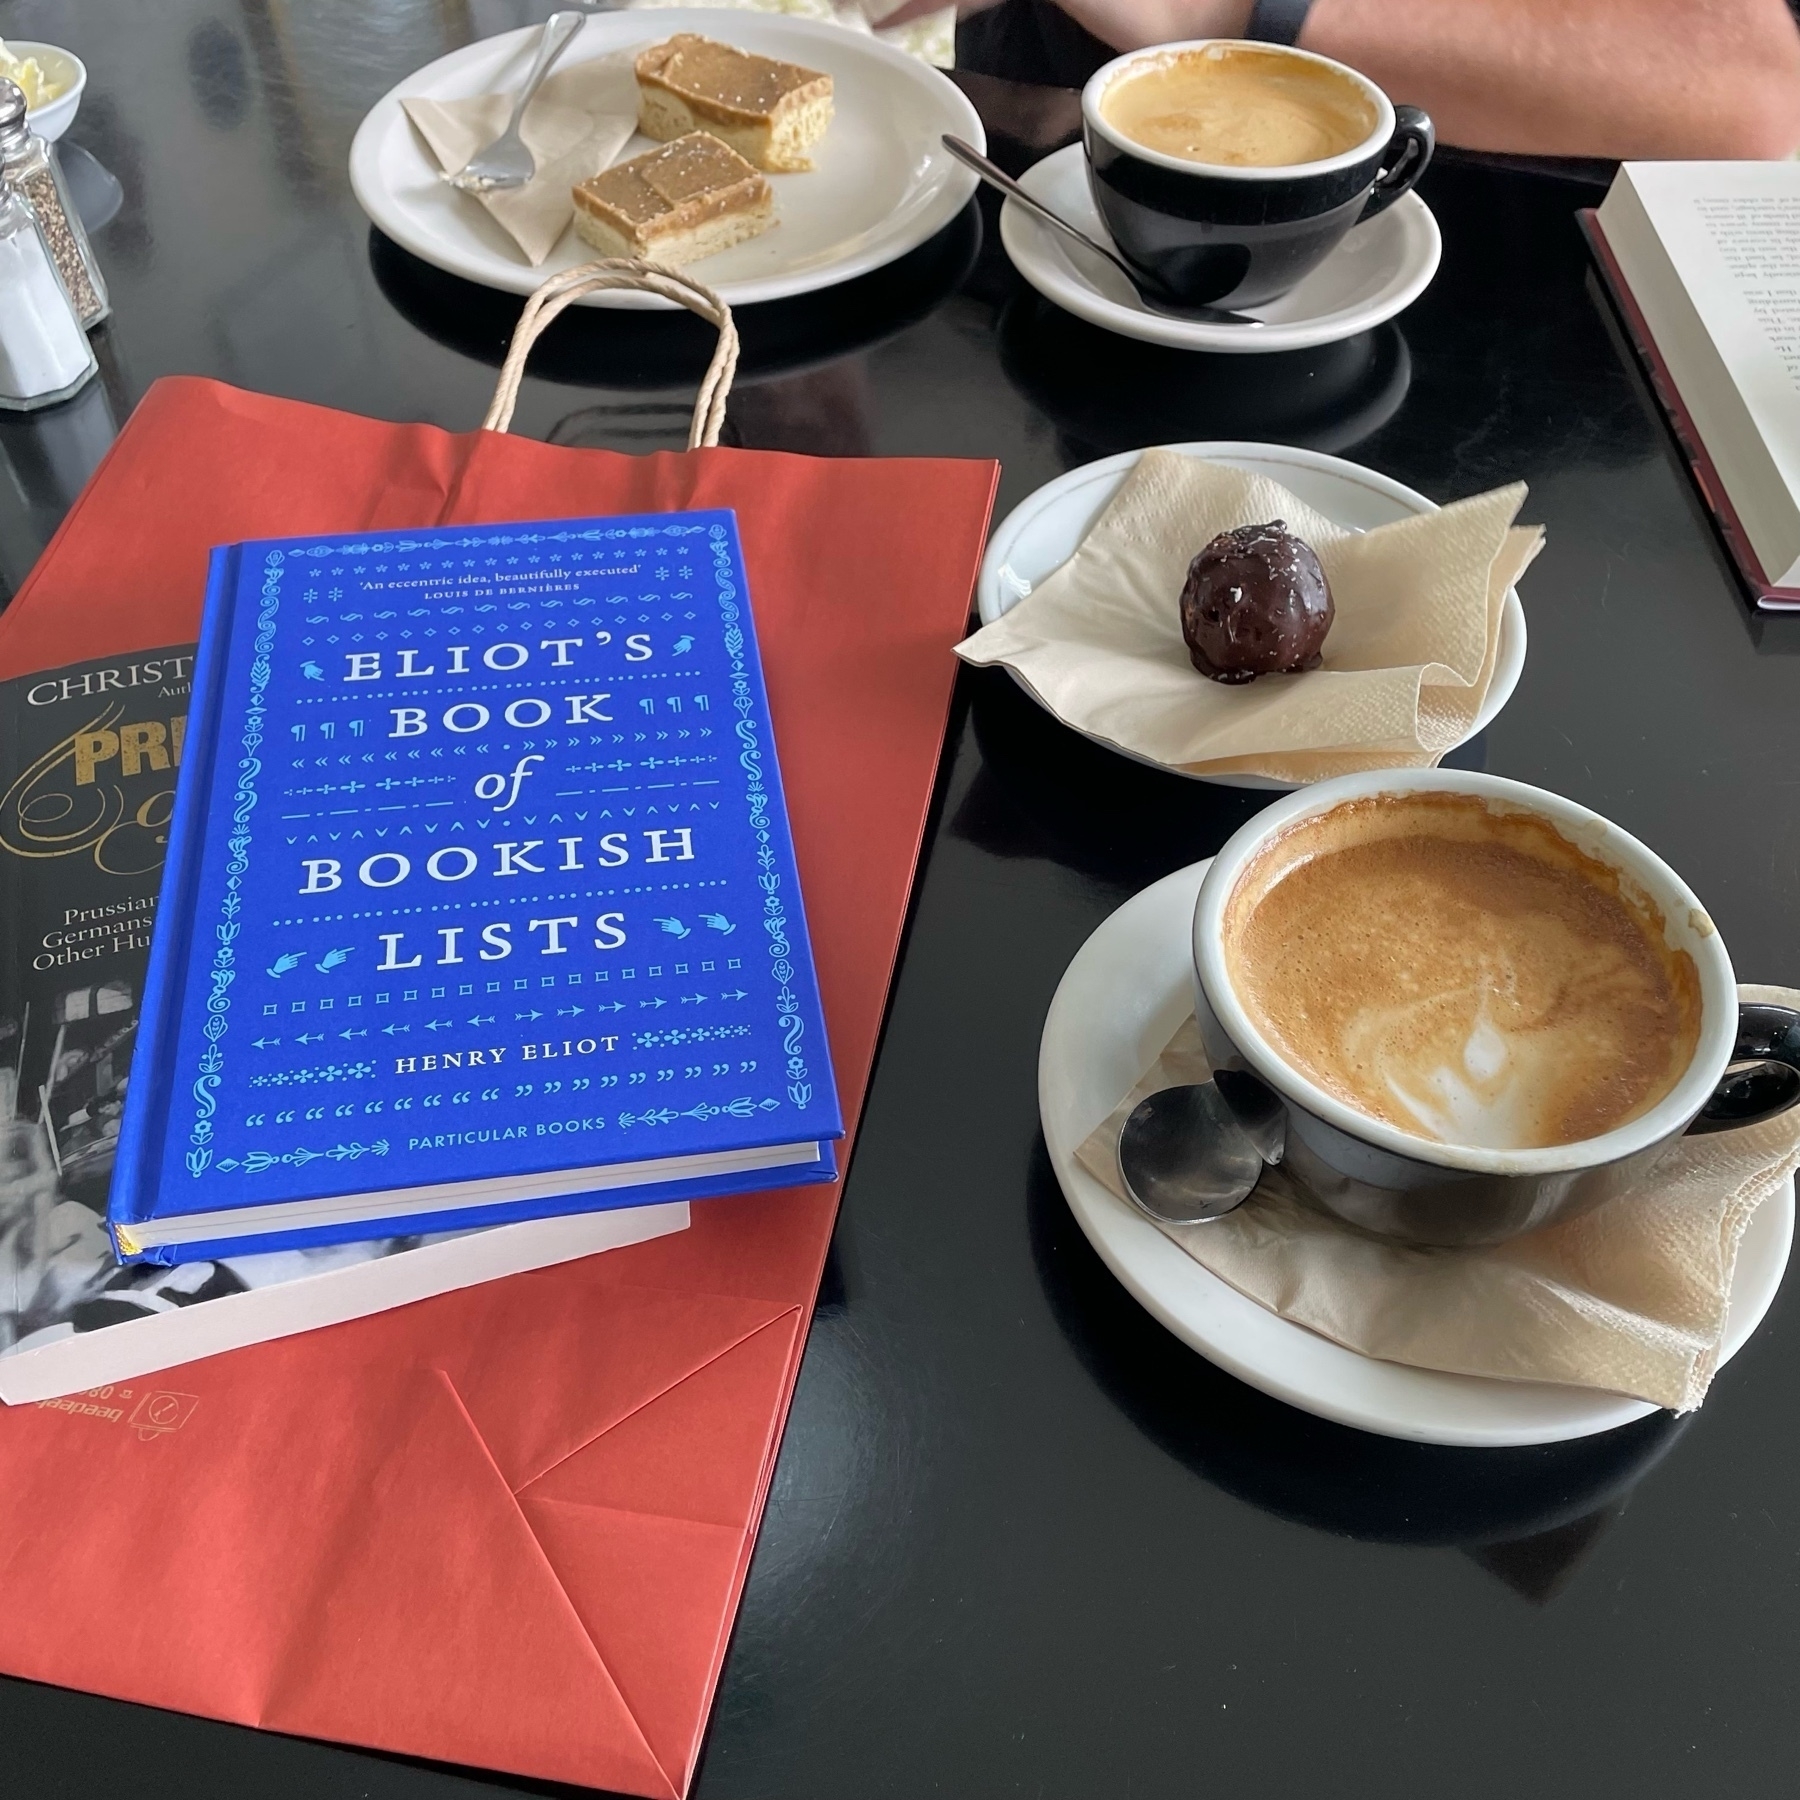 Two books (one titled “Eliot’s Book of Bookish List”) and two flat white coffees. 